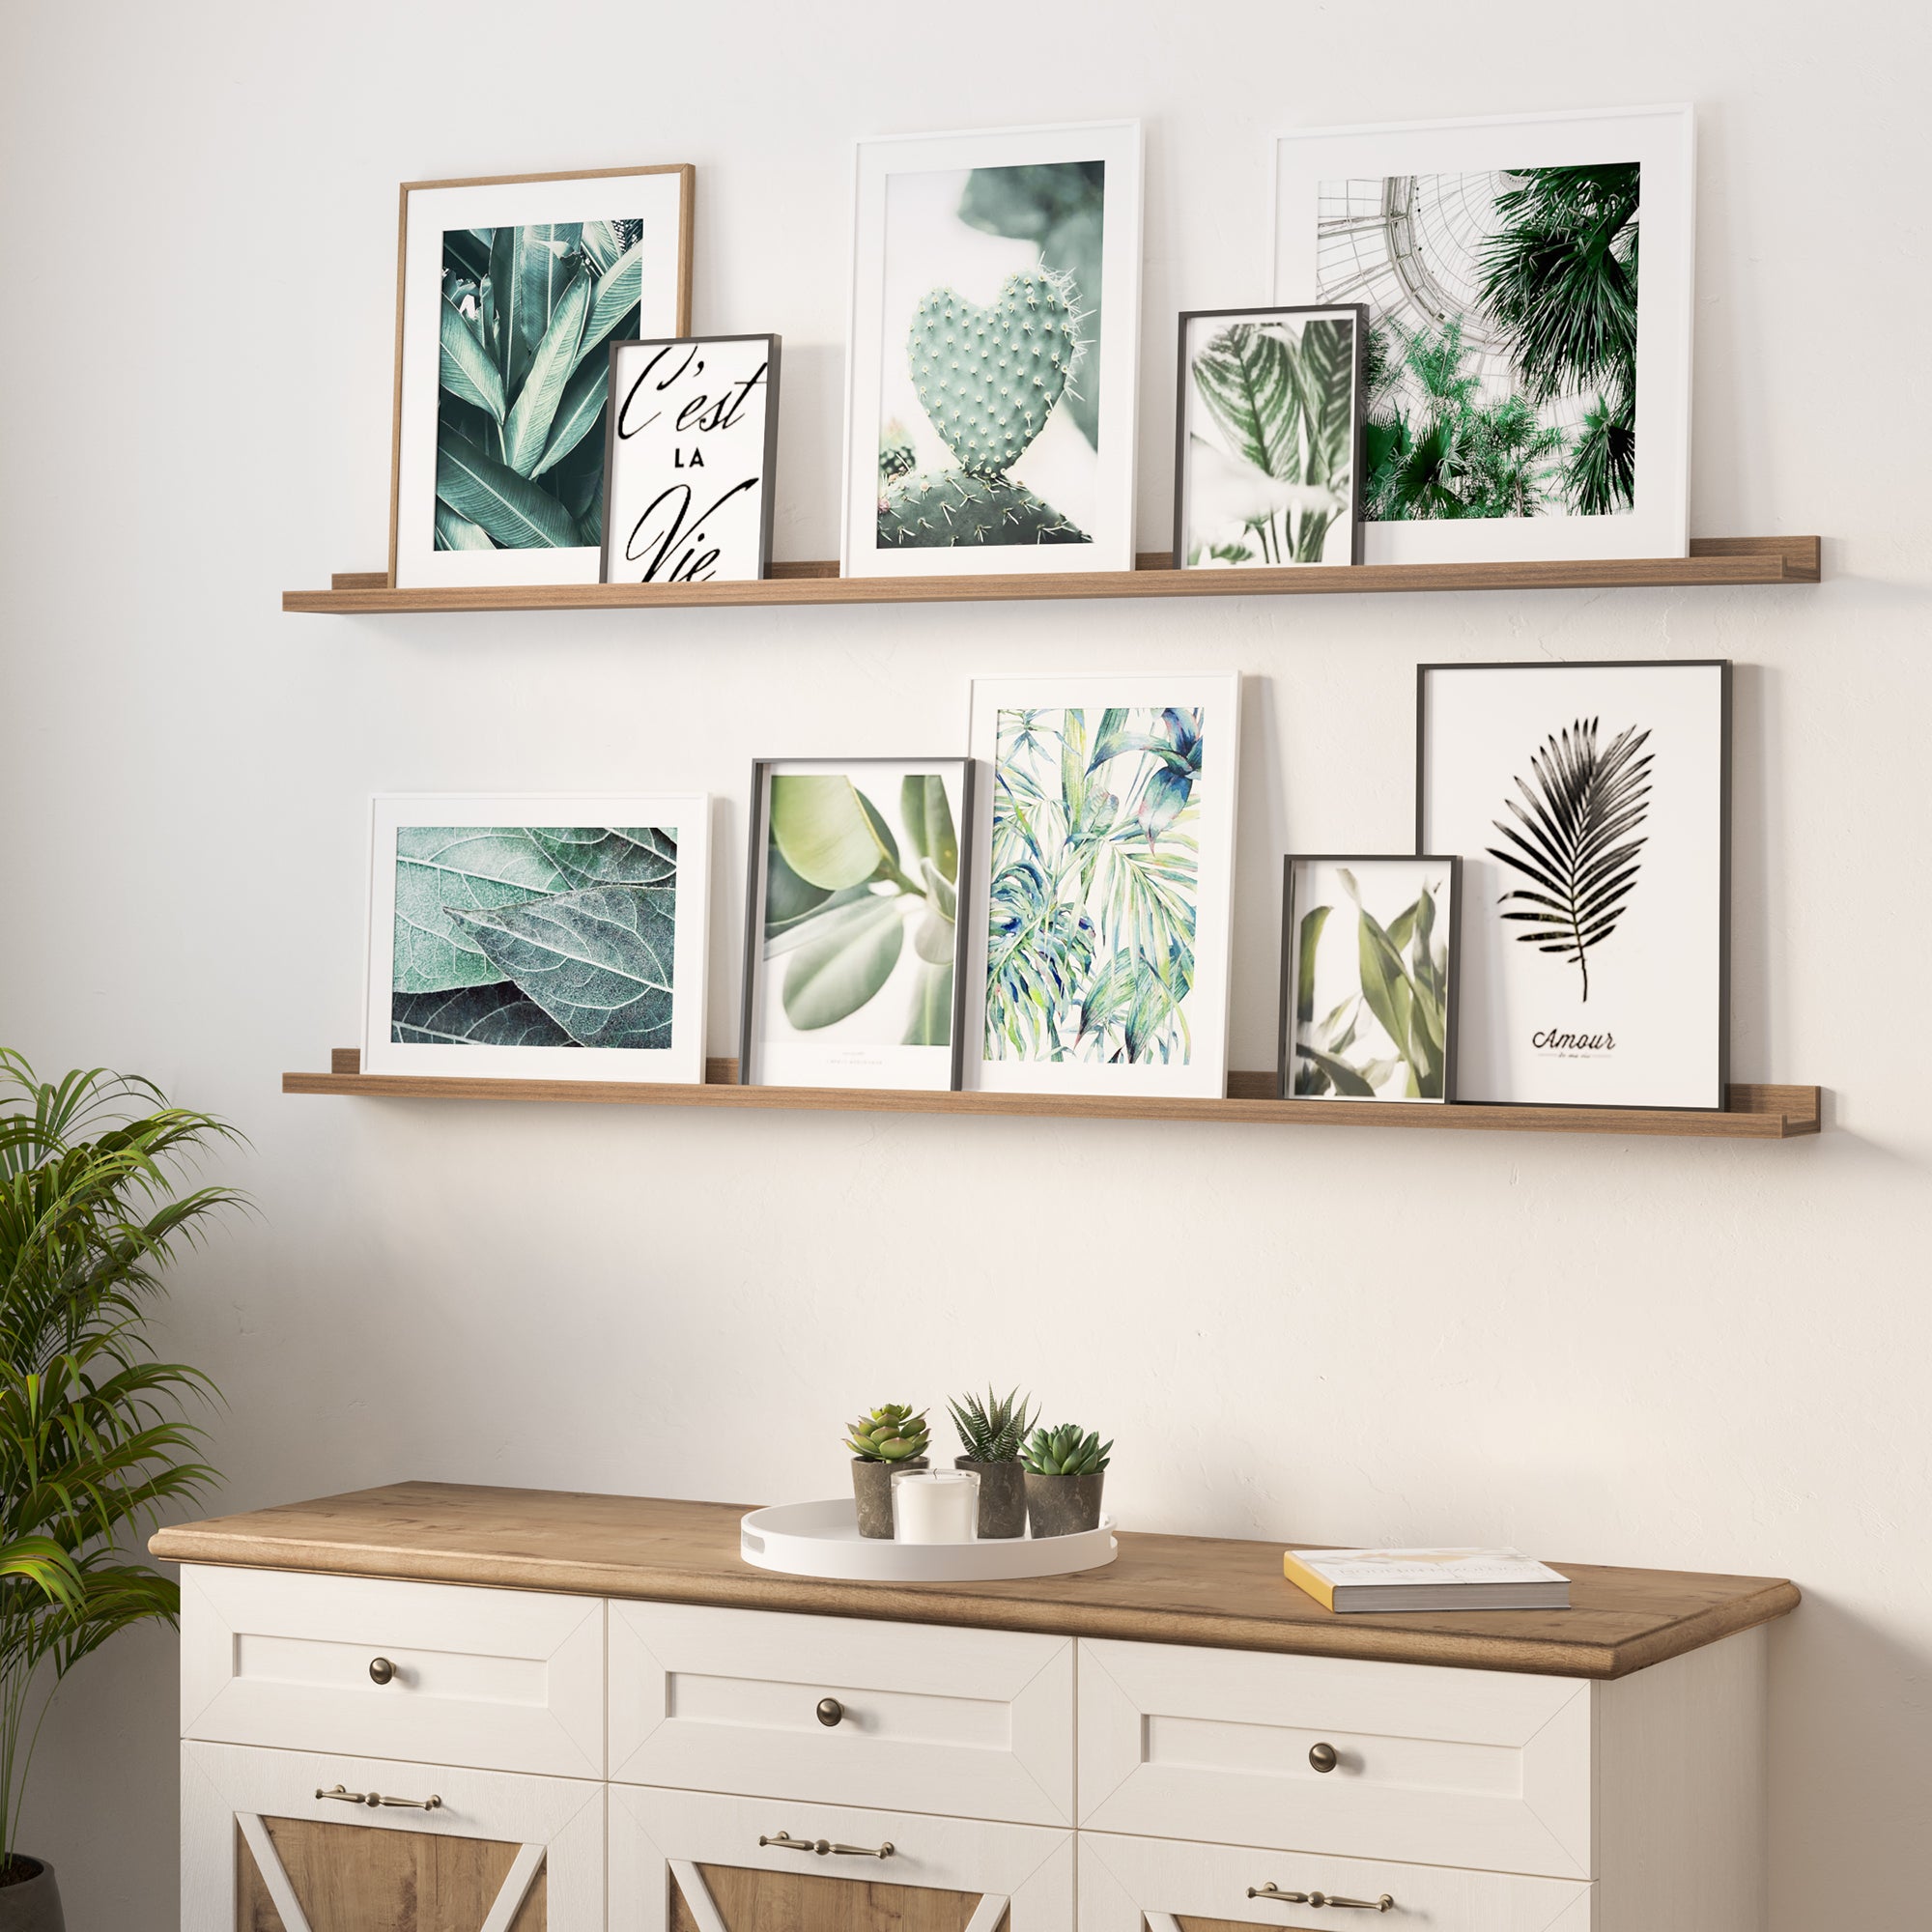 A warm interior with two wooden shelves displaying framed botanical prints above a sideboard with plants.